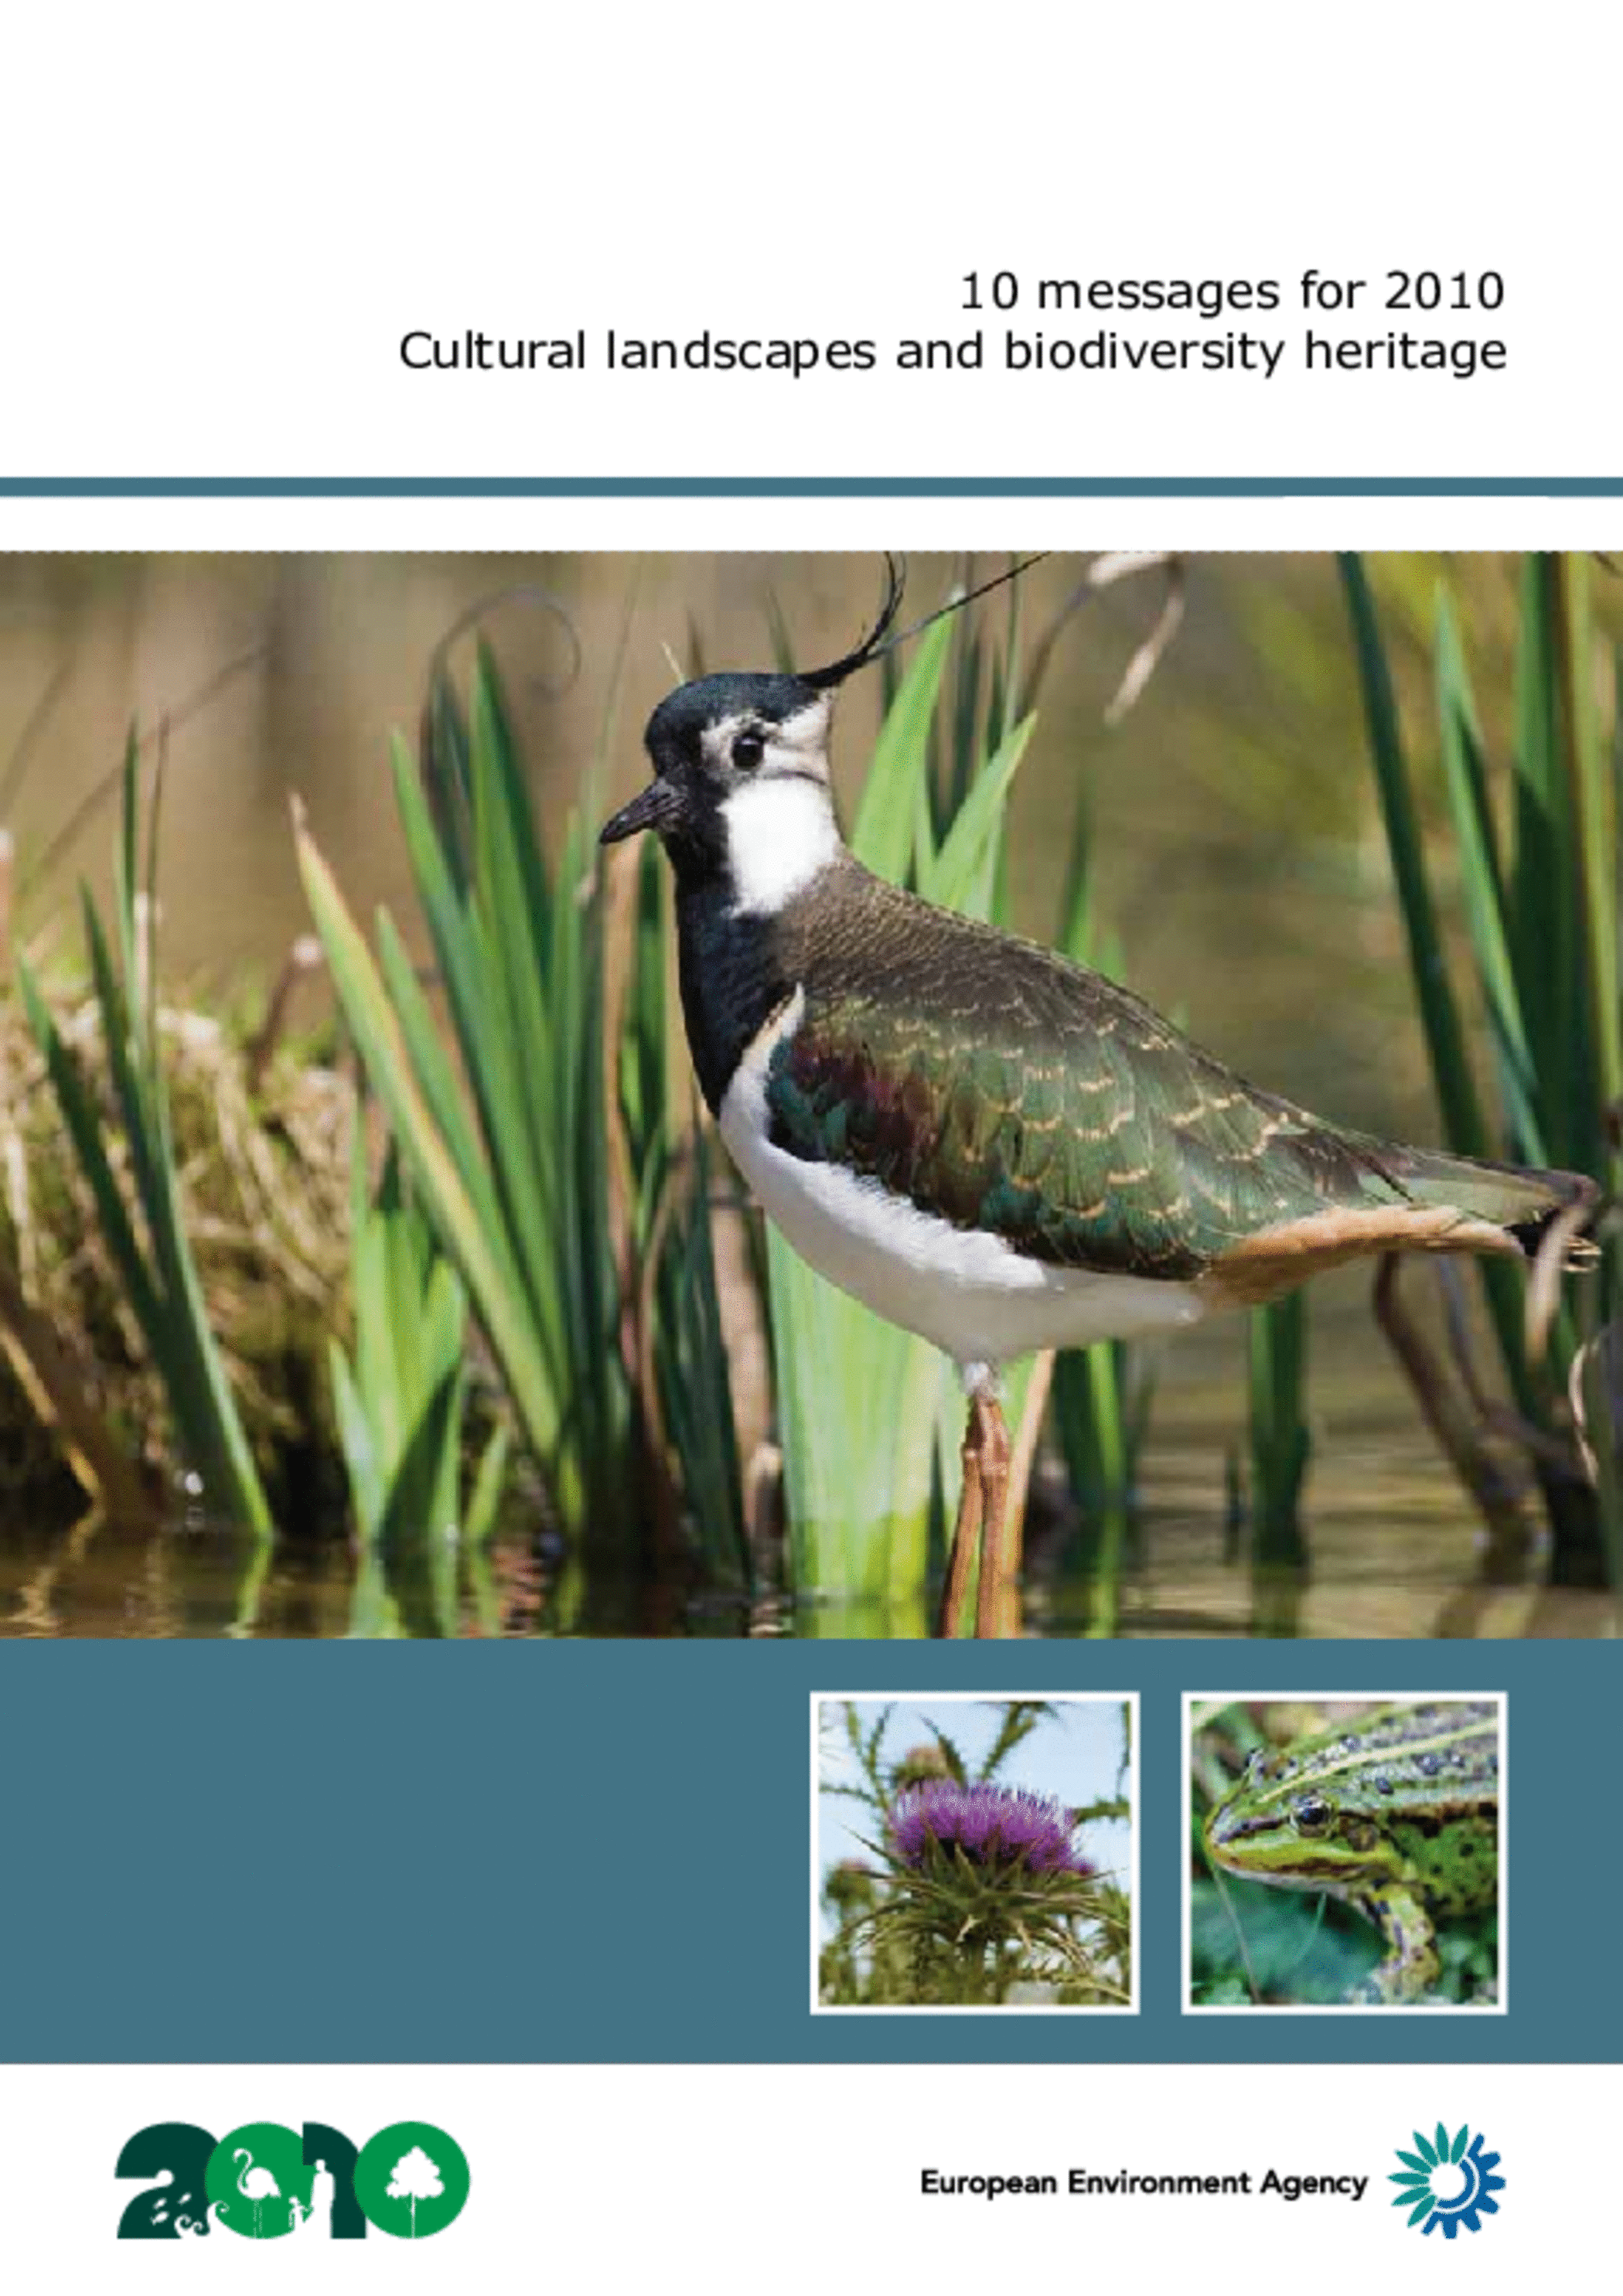 Cultural landscapes and biodiversity heritage